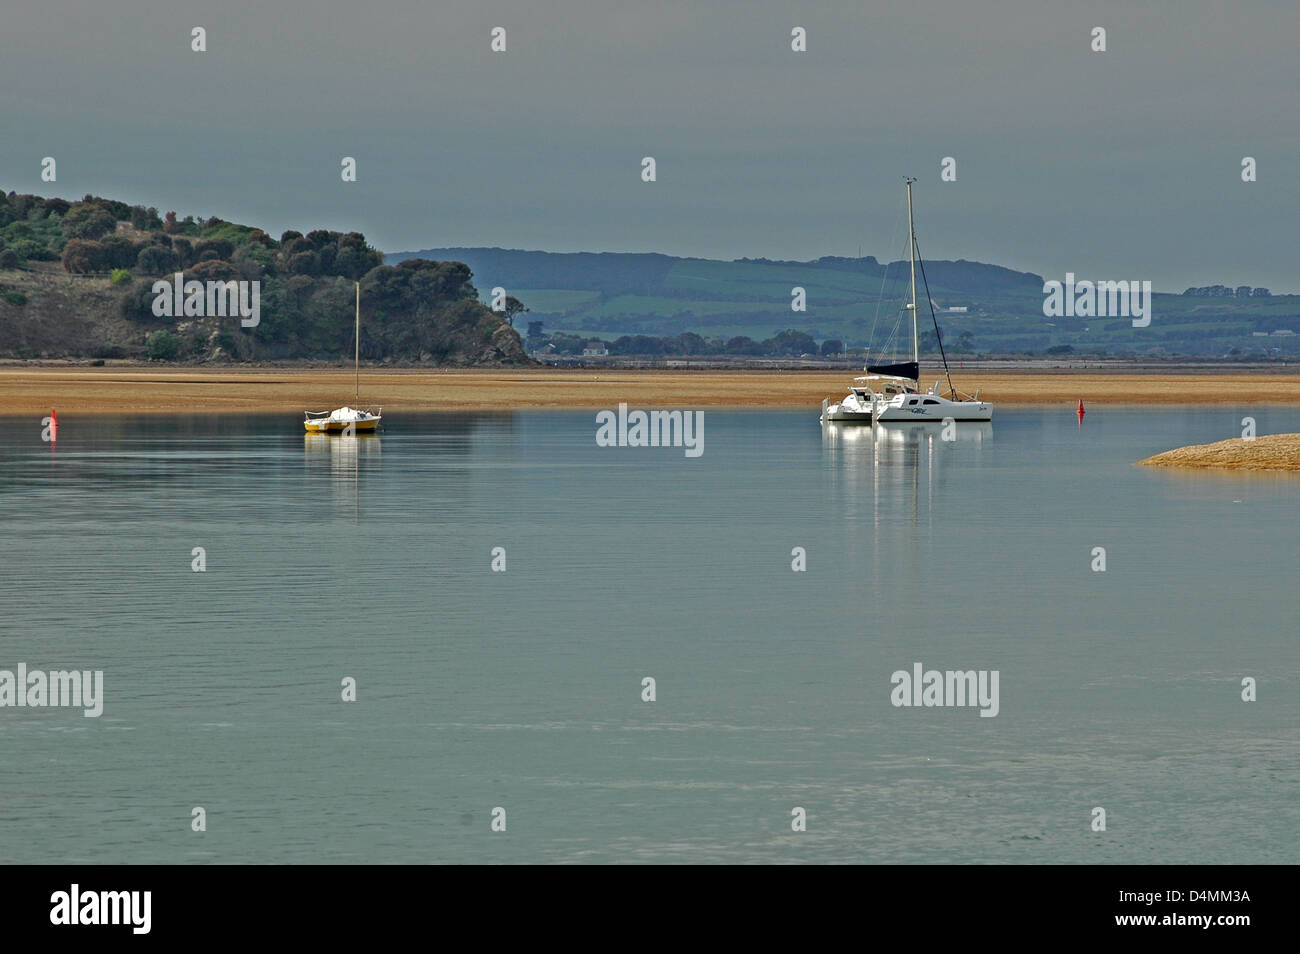 Boats on the inlet, Inverloch, South Gippsland, Victoria, Australia. Stock Photo